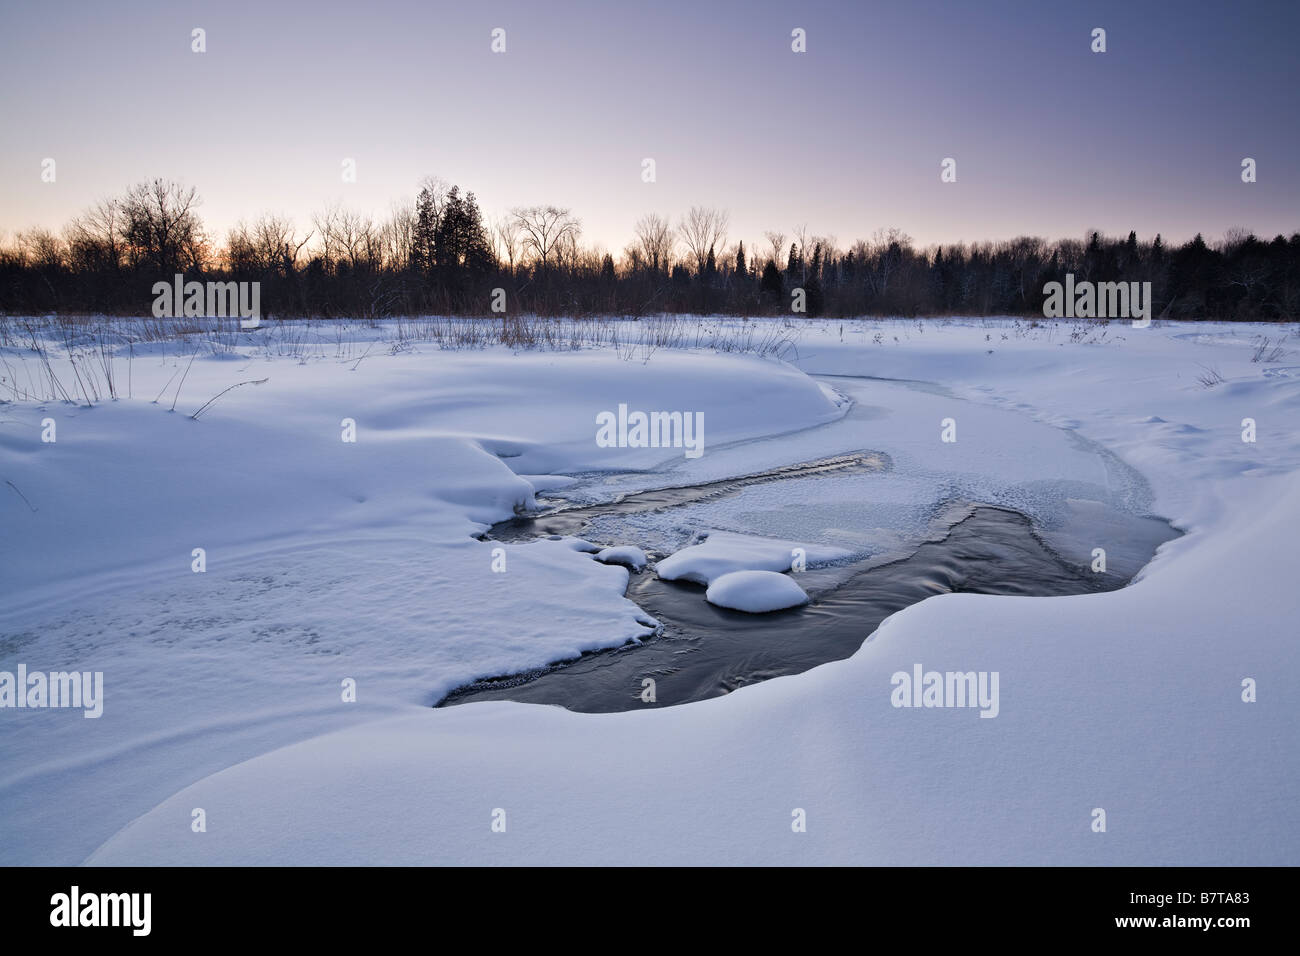 Snow and Ice on the Black River, East Gwillimbury, Ontario, Canada Stock Photo